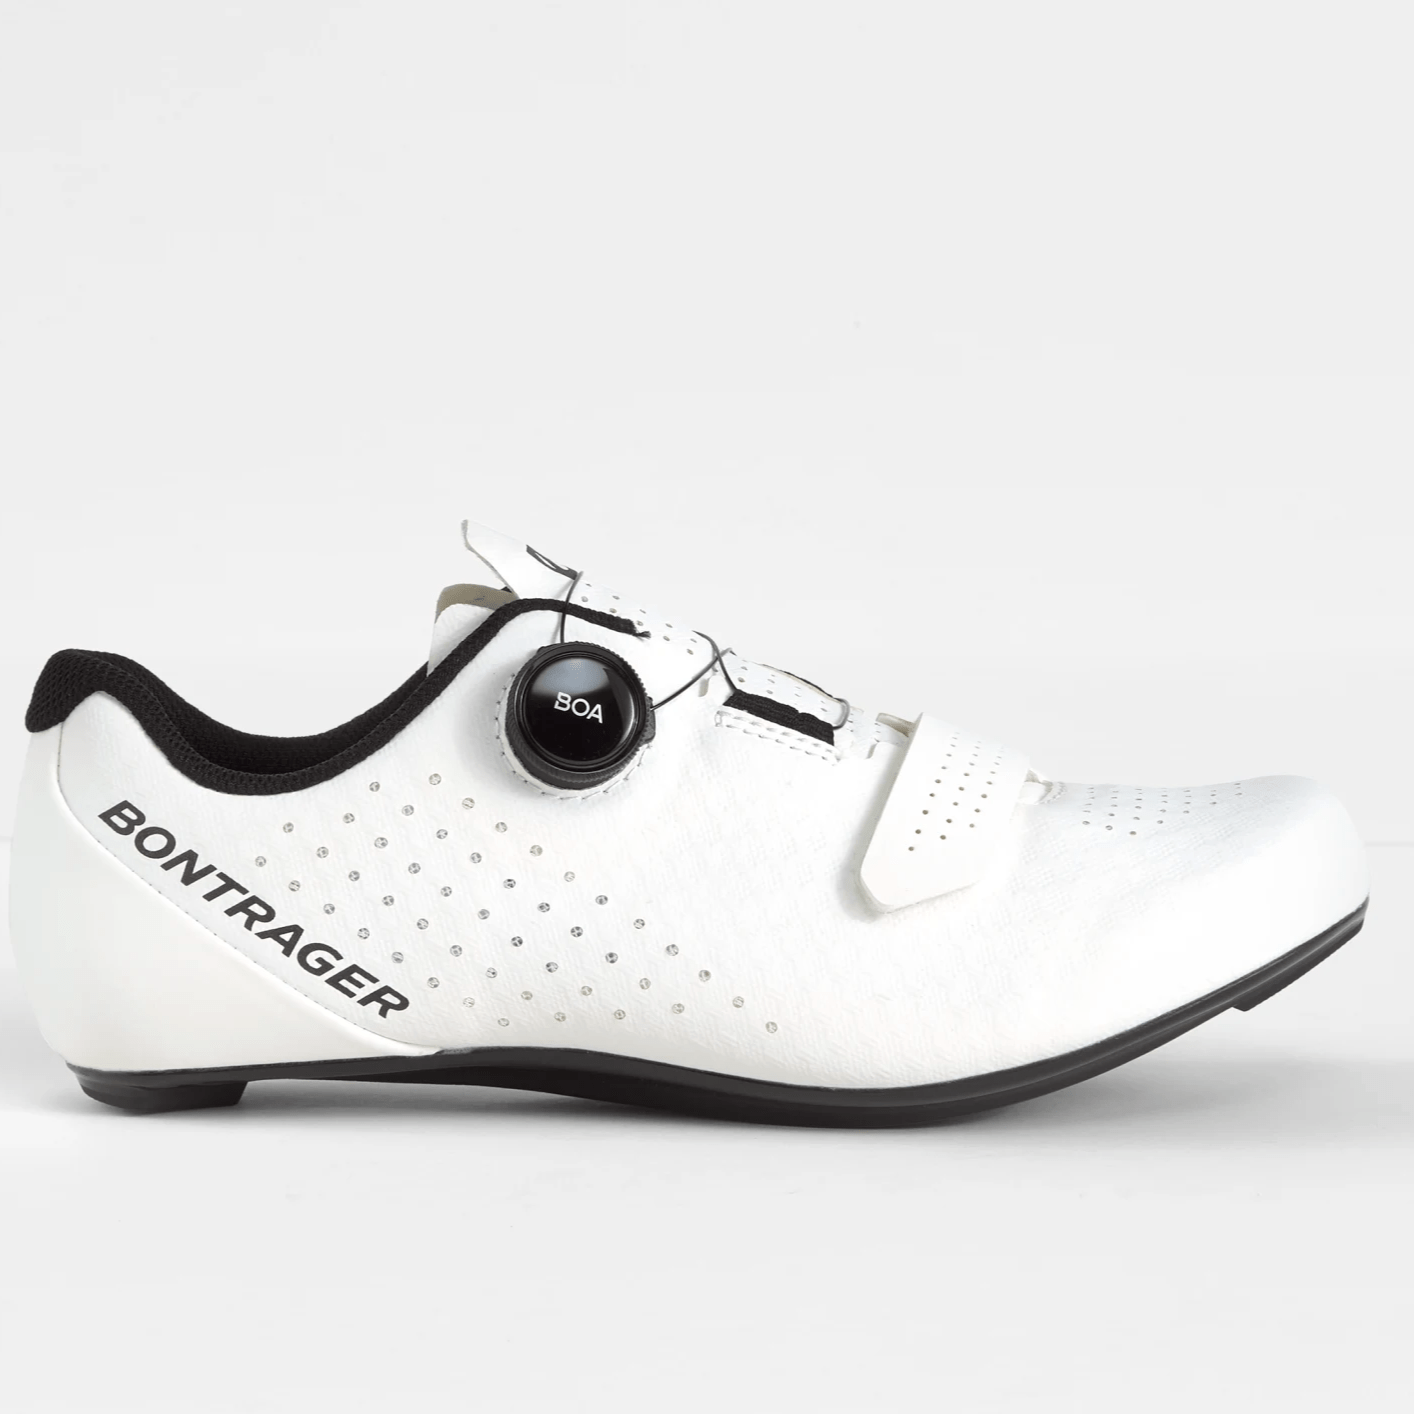 Bontrager Circuit Road Cycling Shoe White / 37 Apparel - Apparel Accessories - Shoes - Road